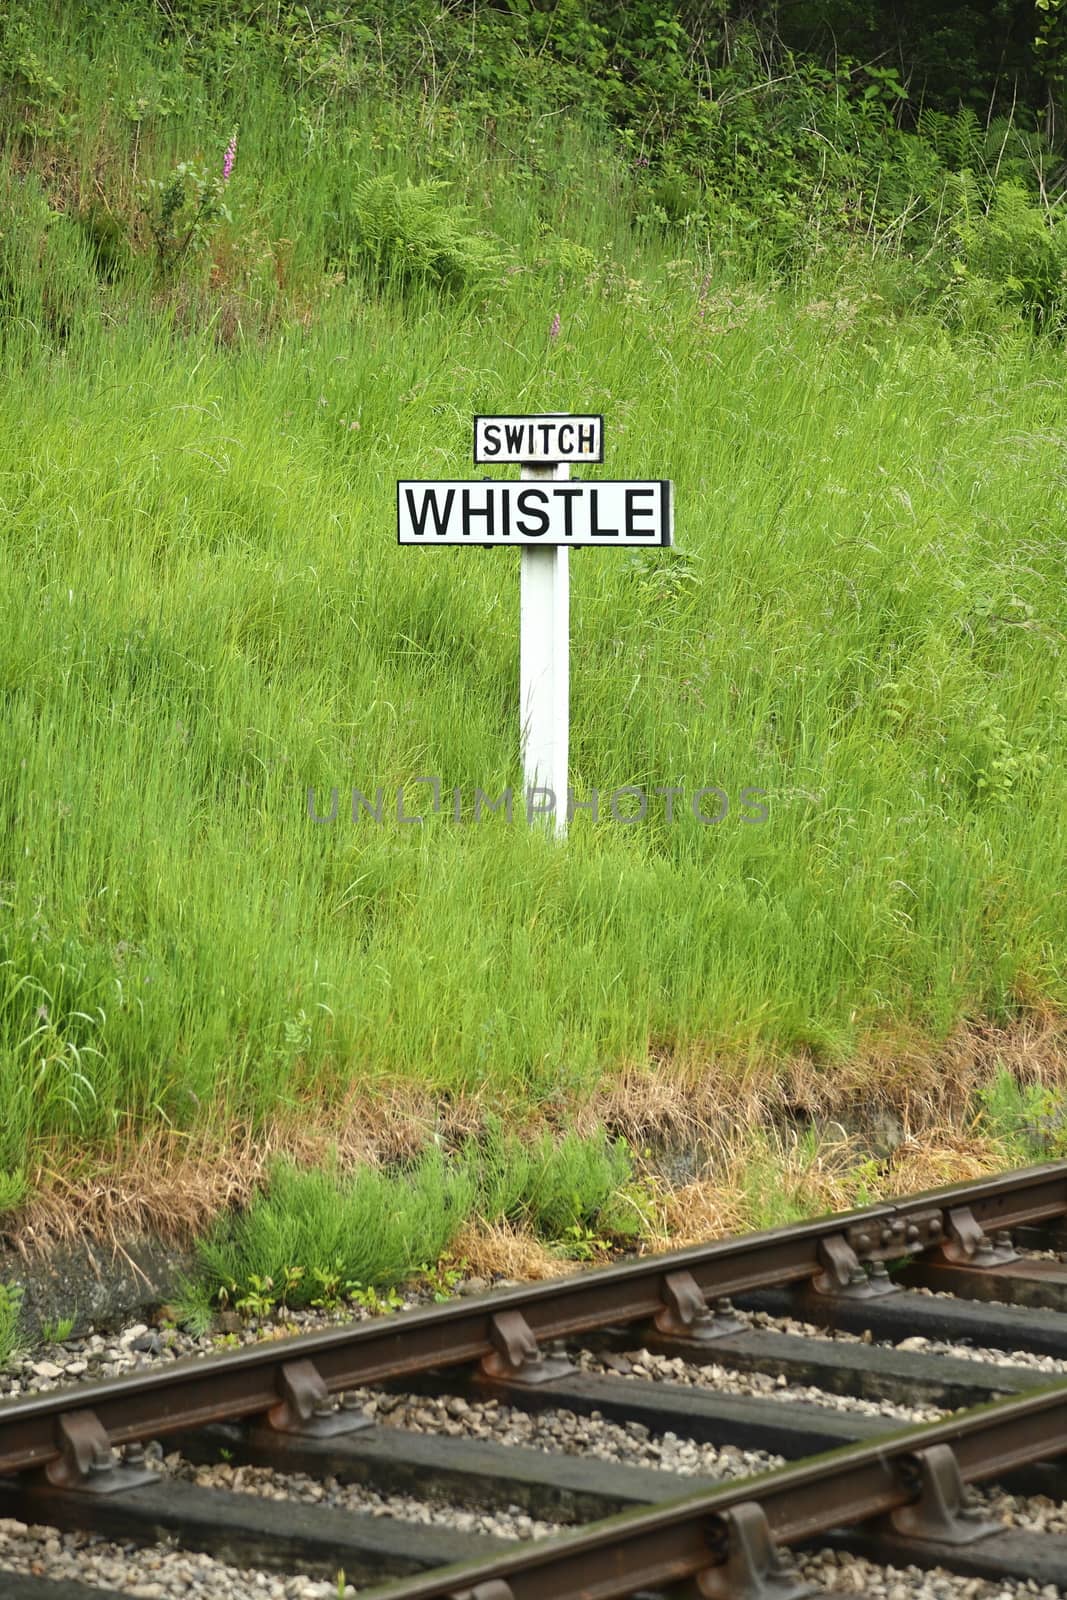 The view across railway track towards a sign requiring oncoming trains to blow their whistle.